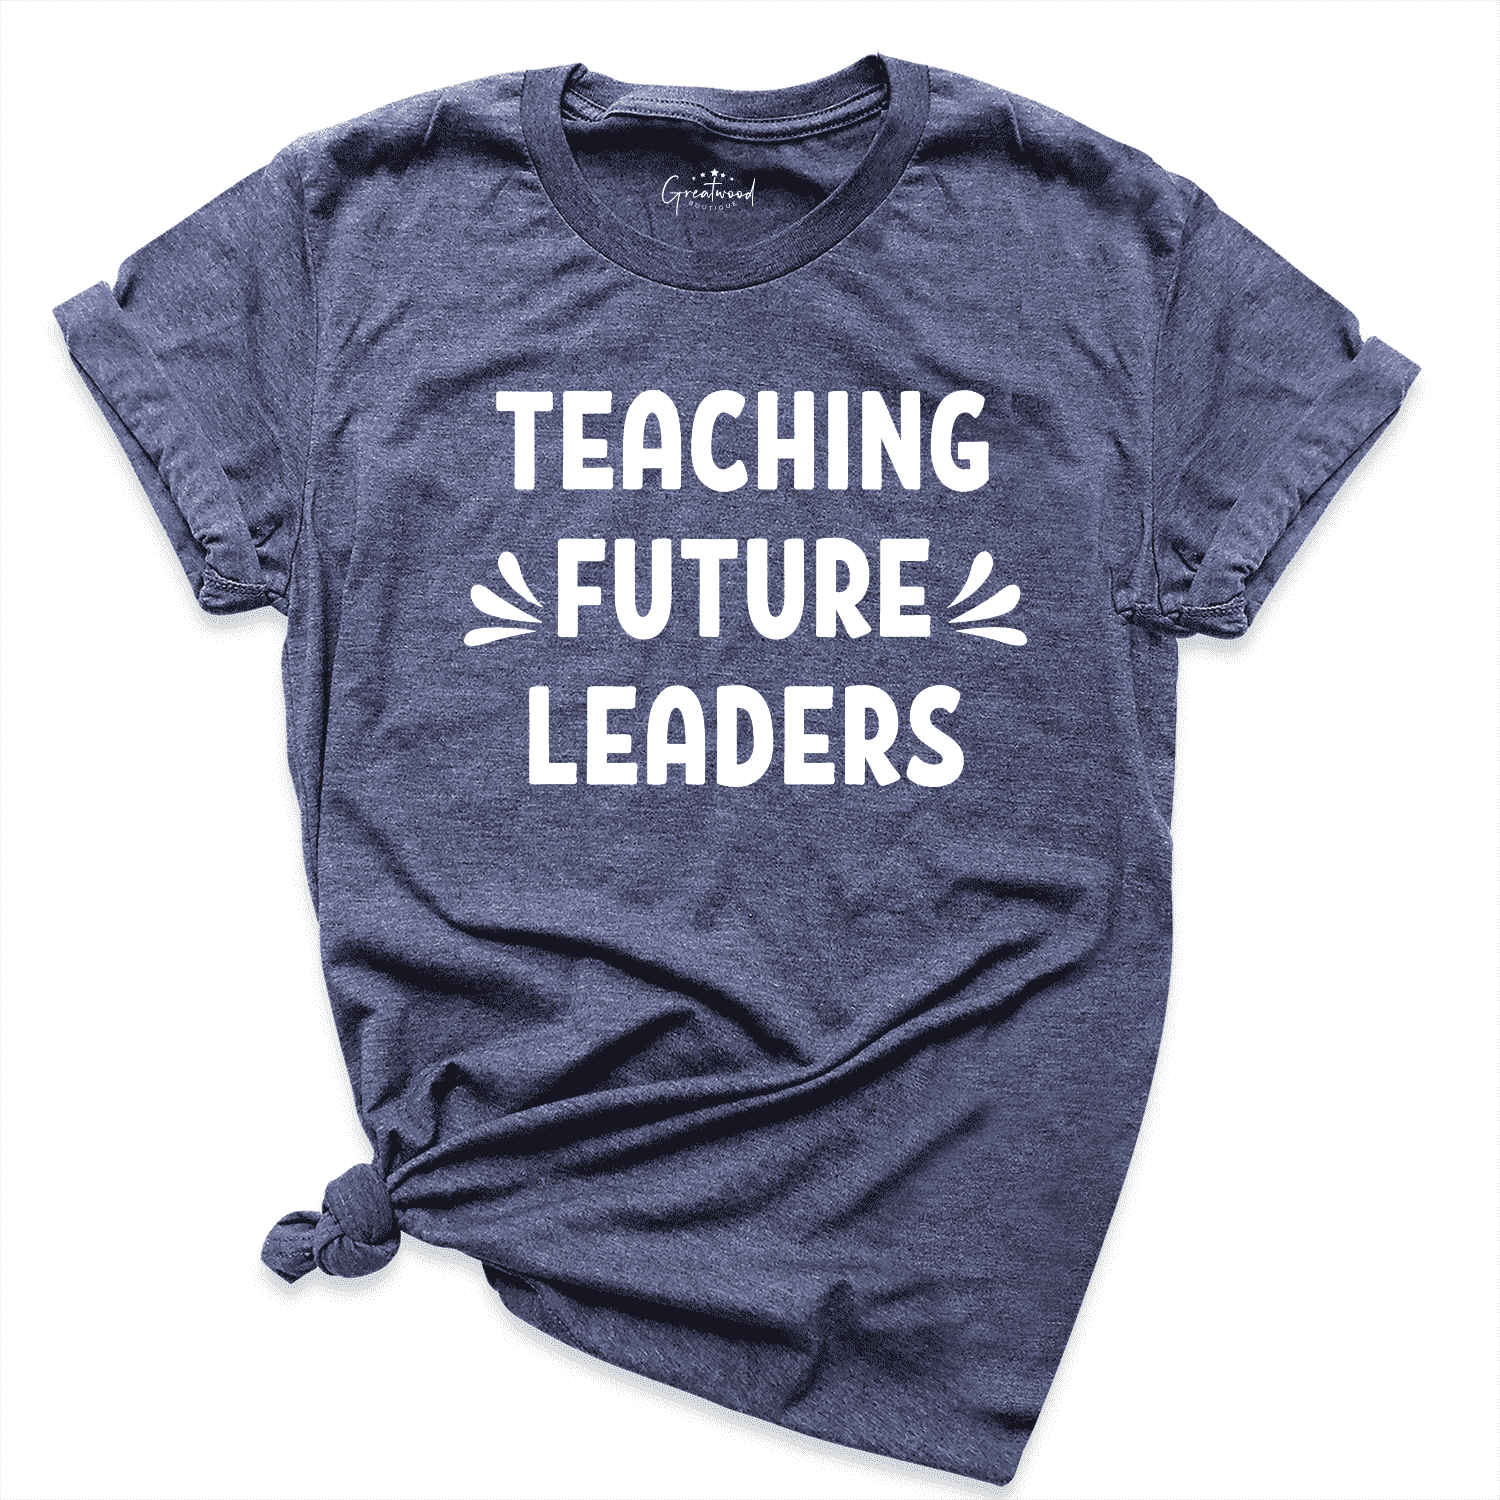 Teaching Future Leaders Shirt Navy - Greatwood Boutique